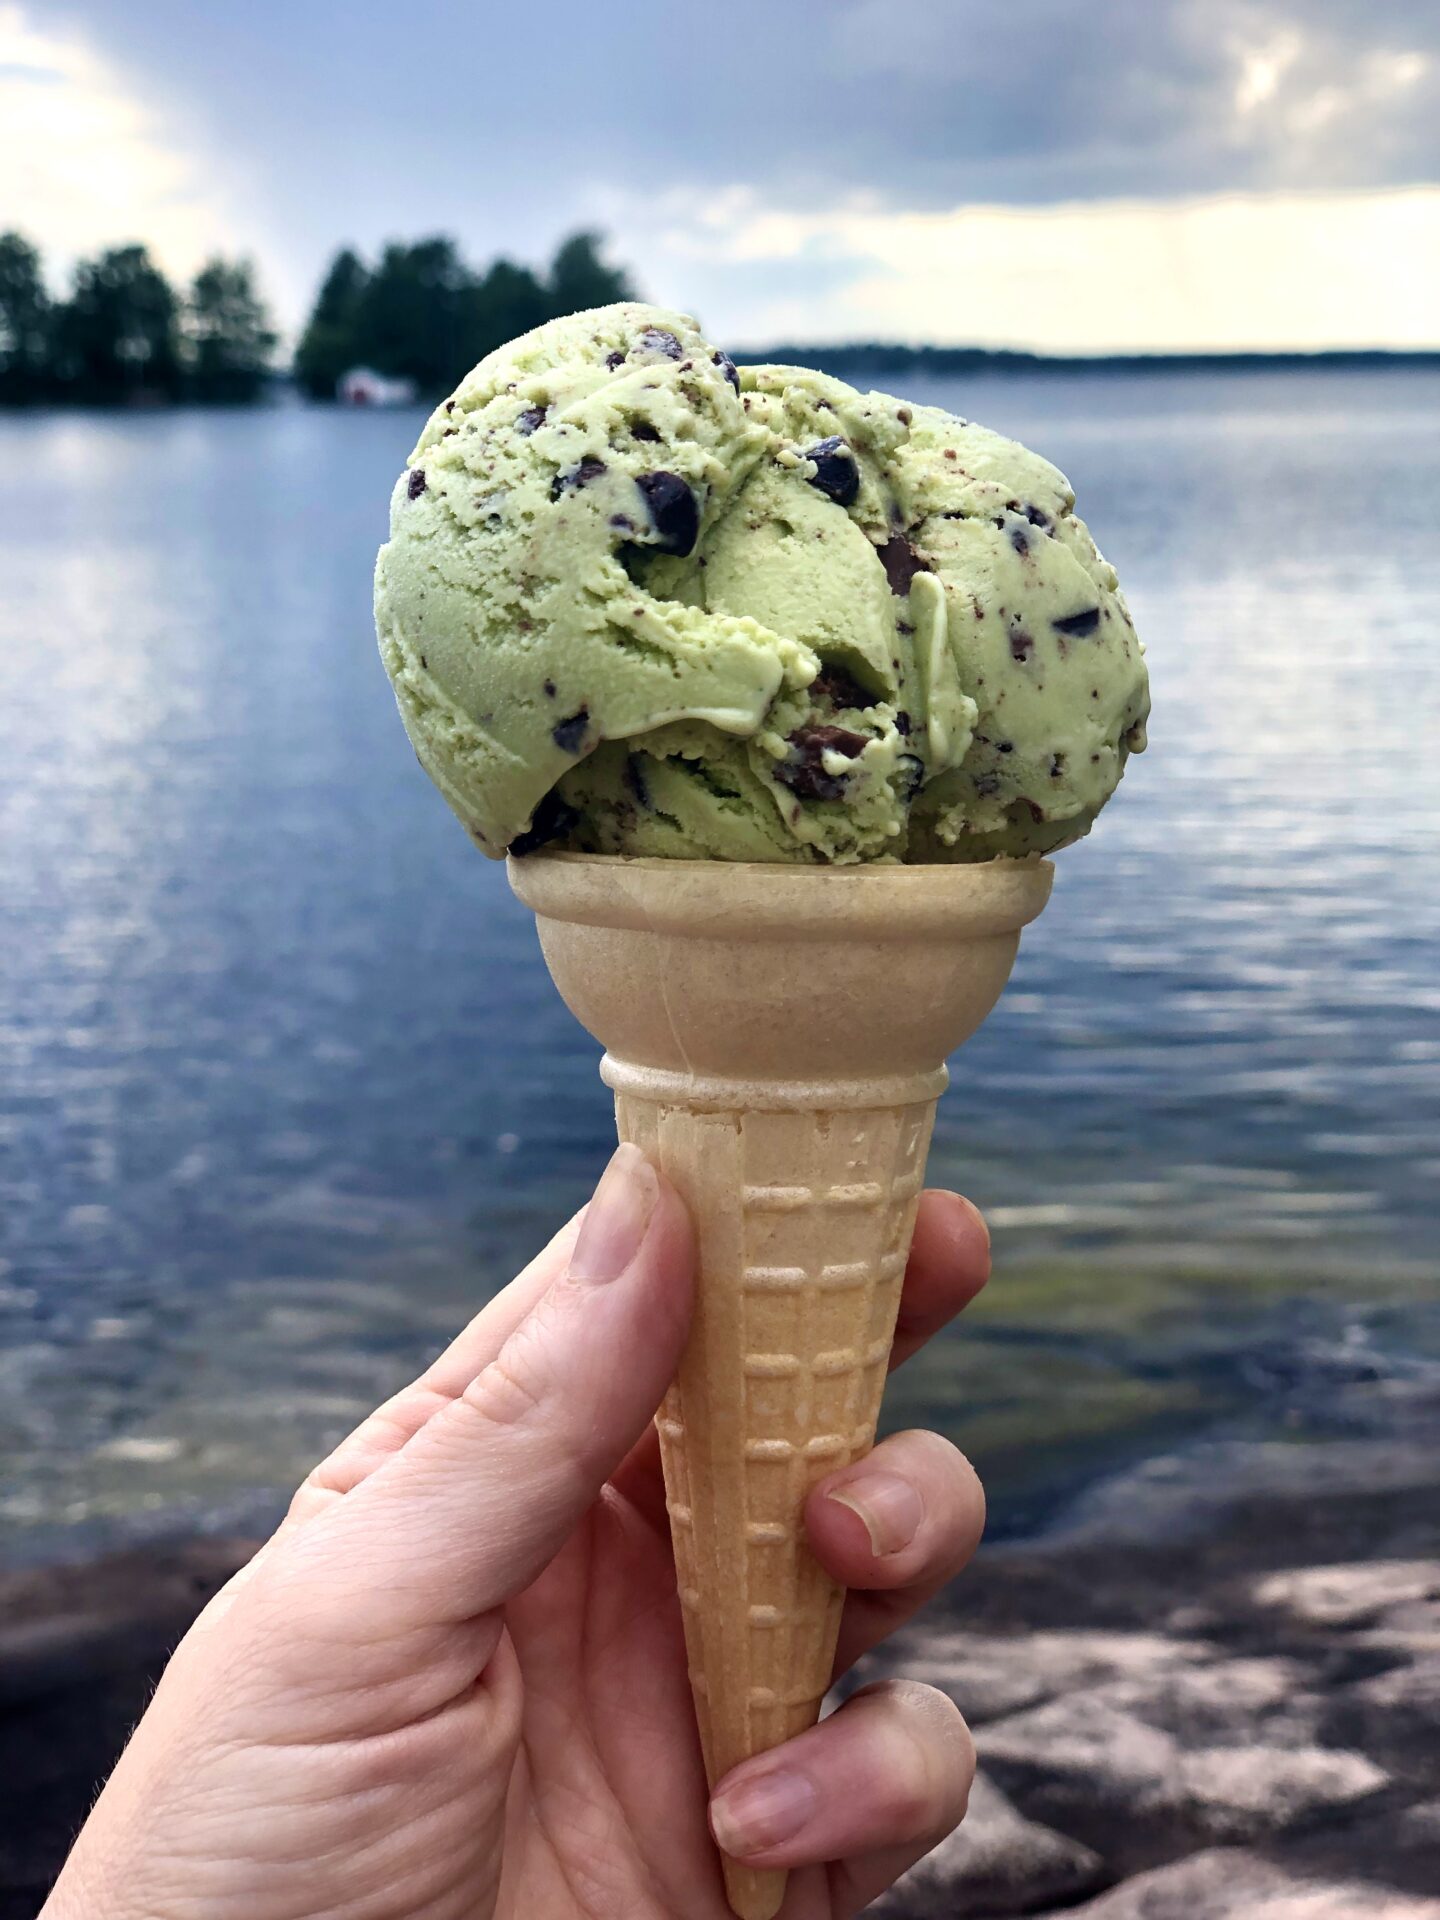 Homemade Mint Chocolate Chip Ice cream in a cone by the shore